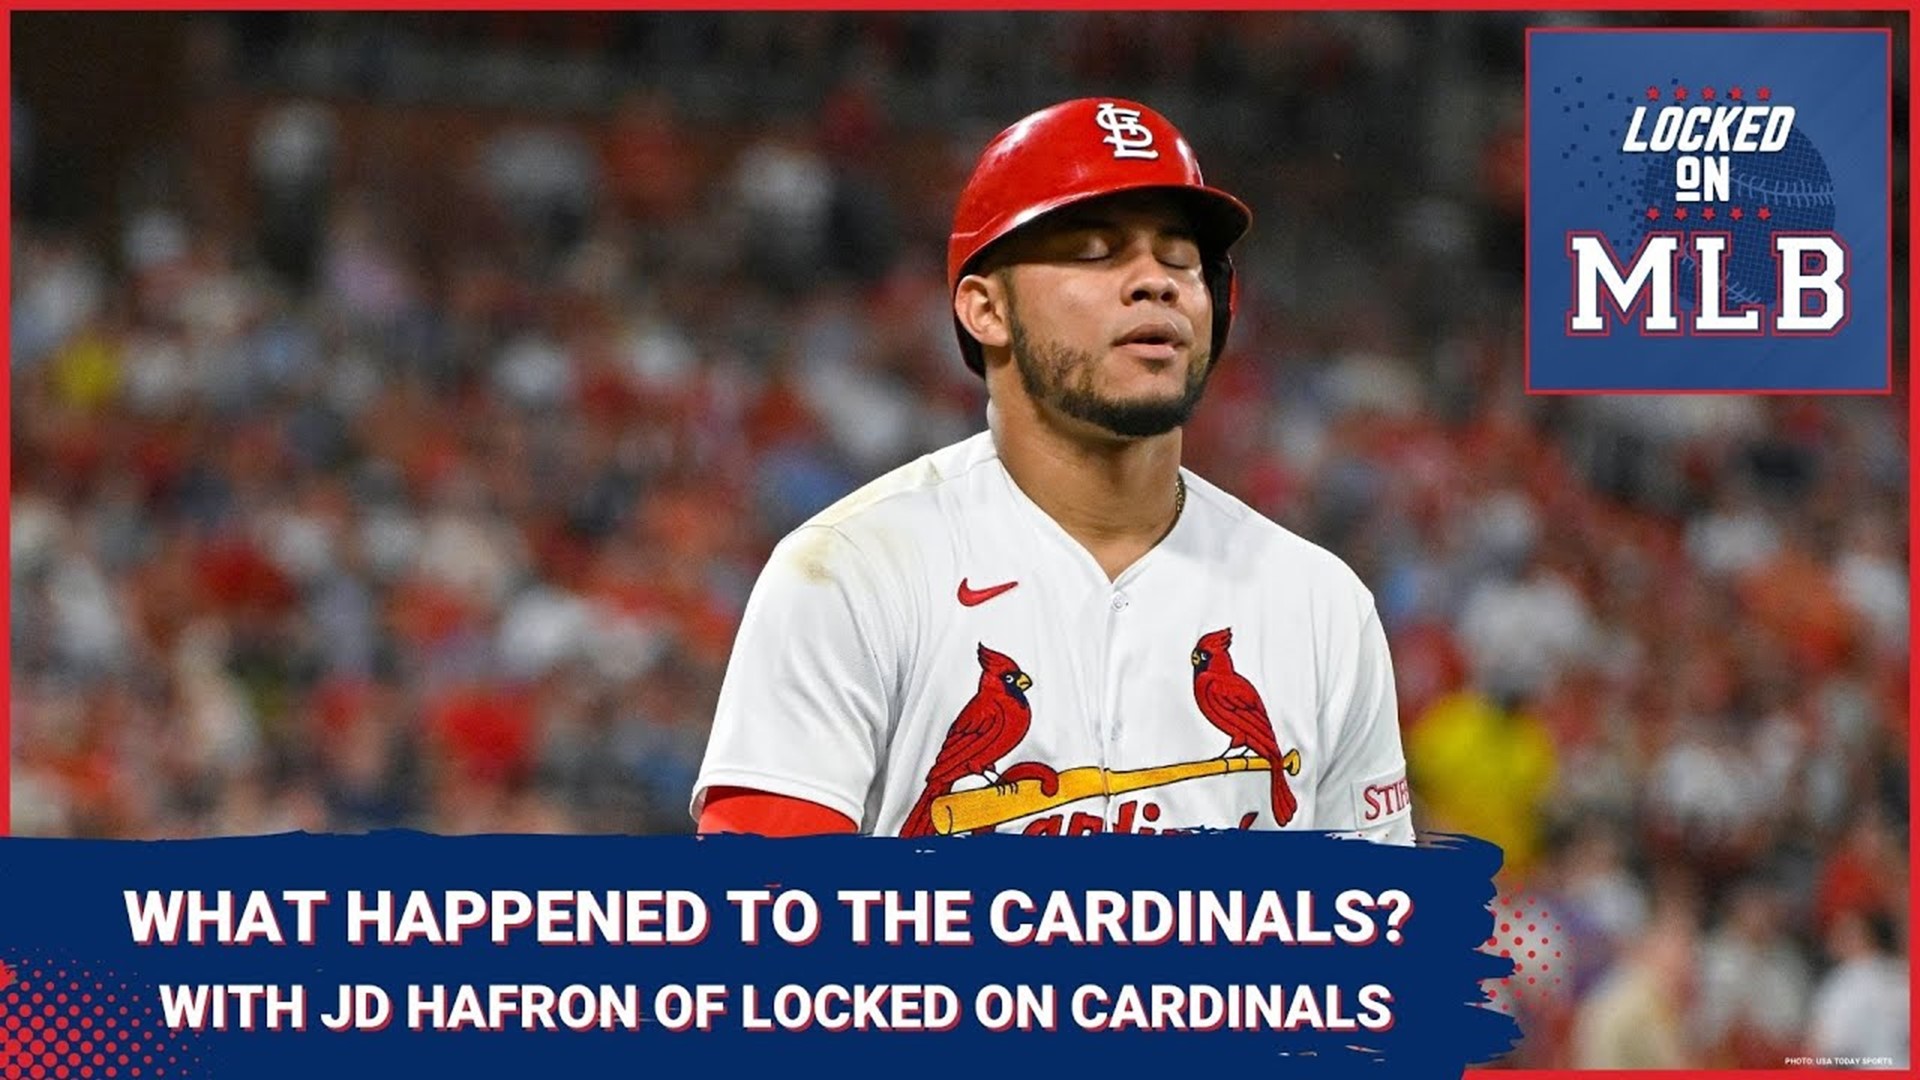 The Underachieving Cardinals and the Bizarre NL Central with JD Hafron of Locked on Cardinals